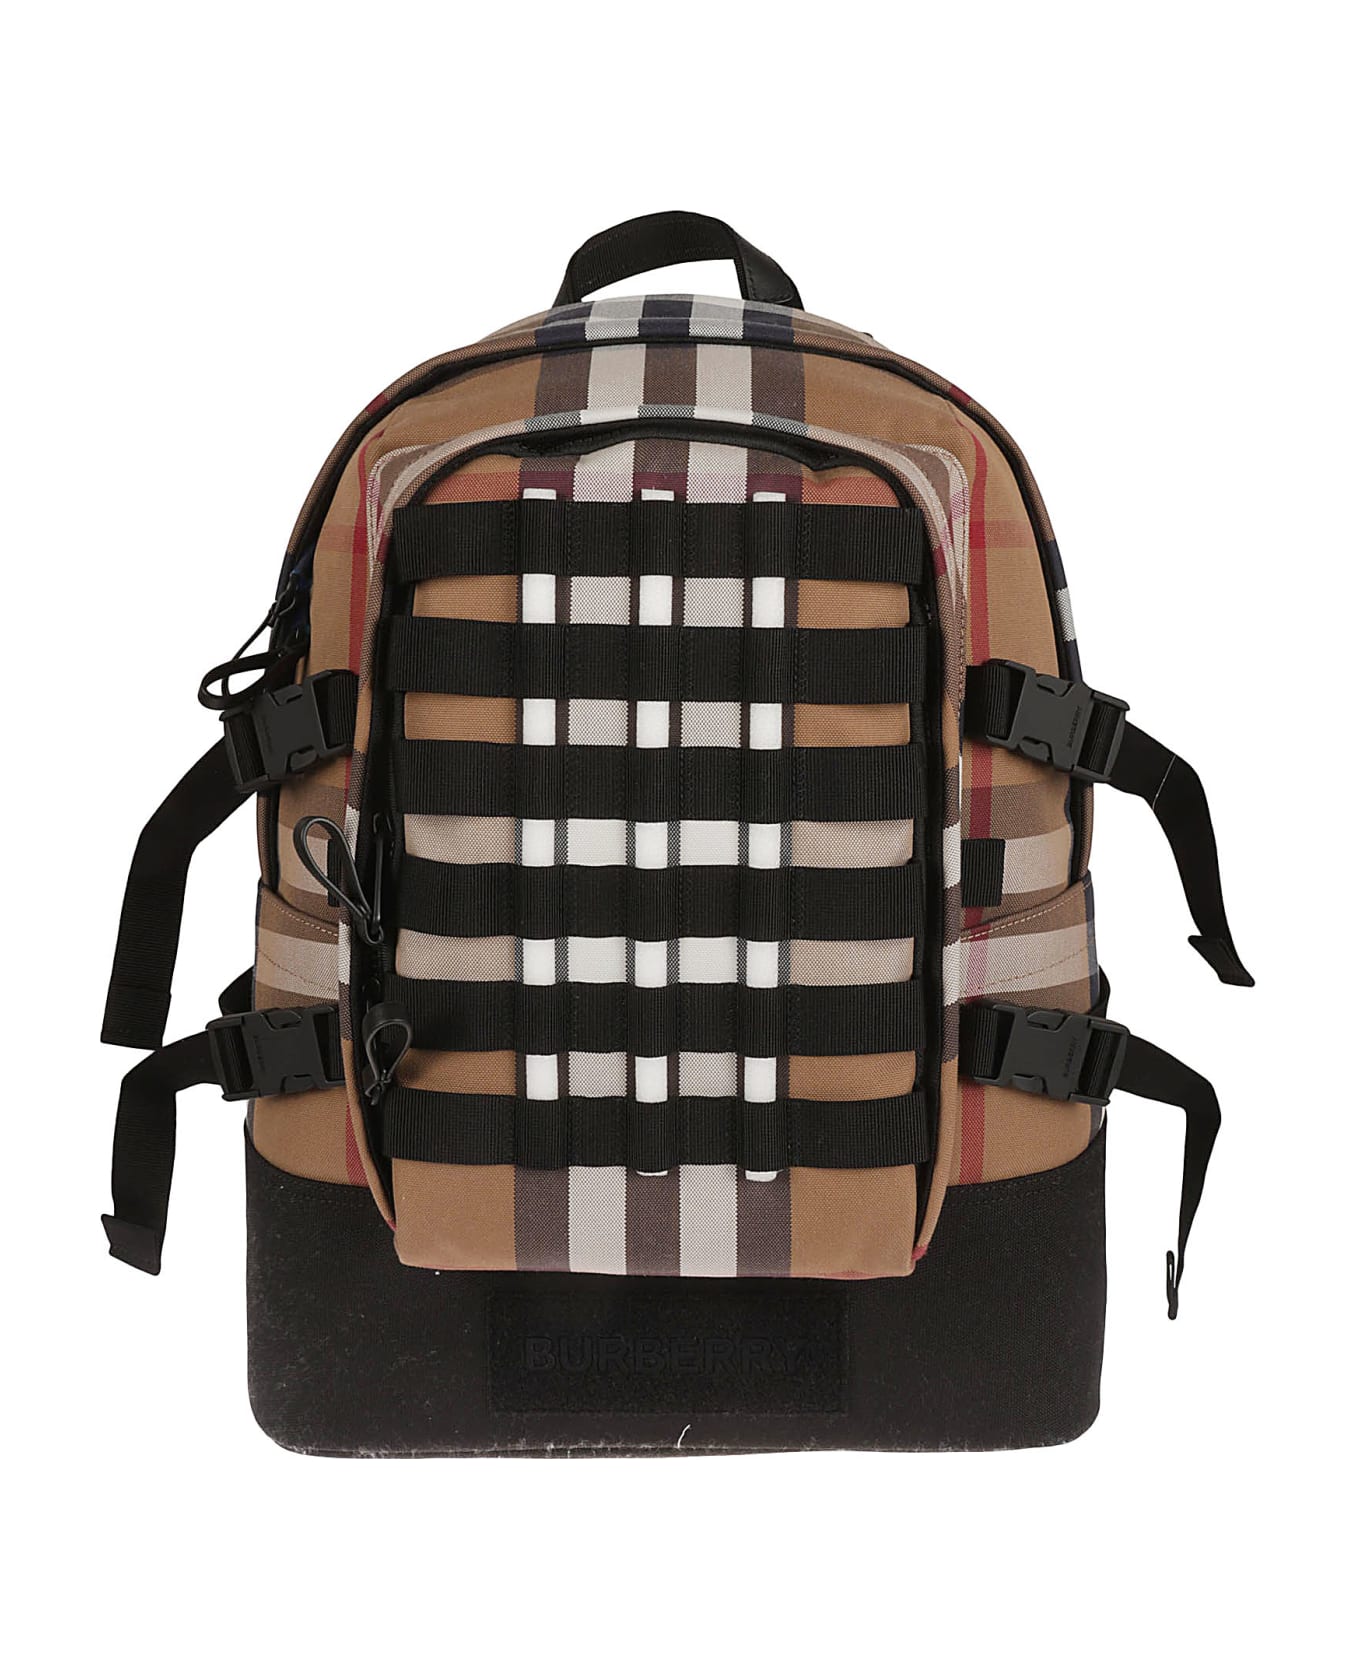 Burberry Jack Backpack - Birch Brown Check